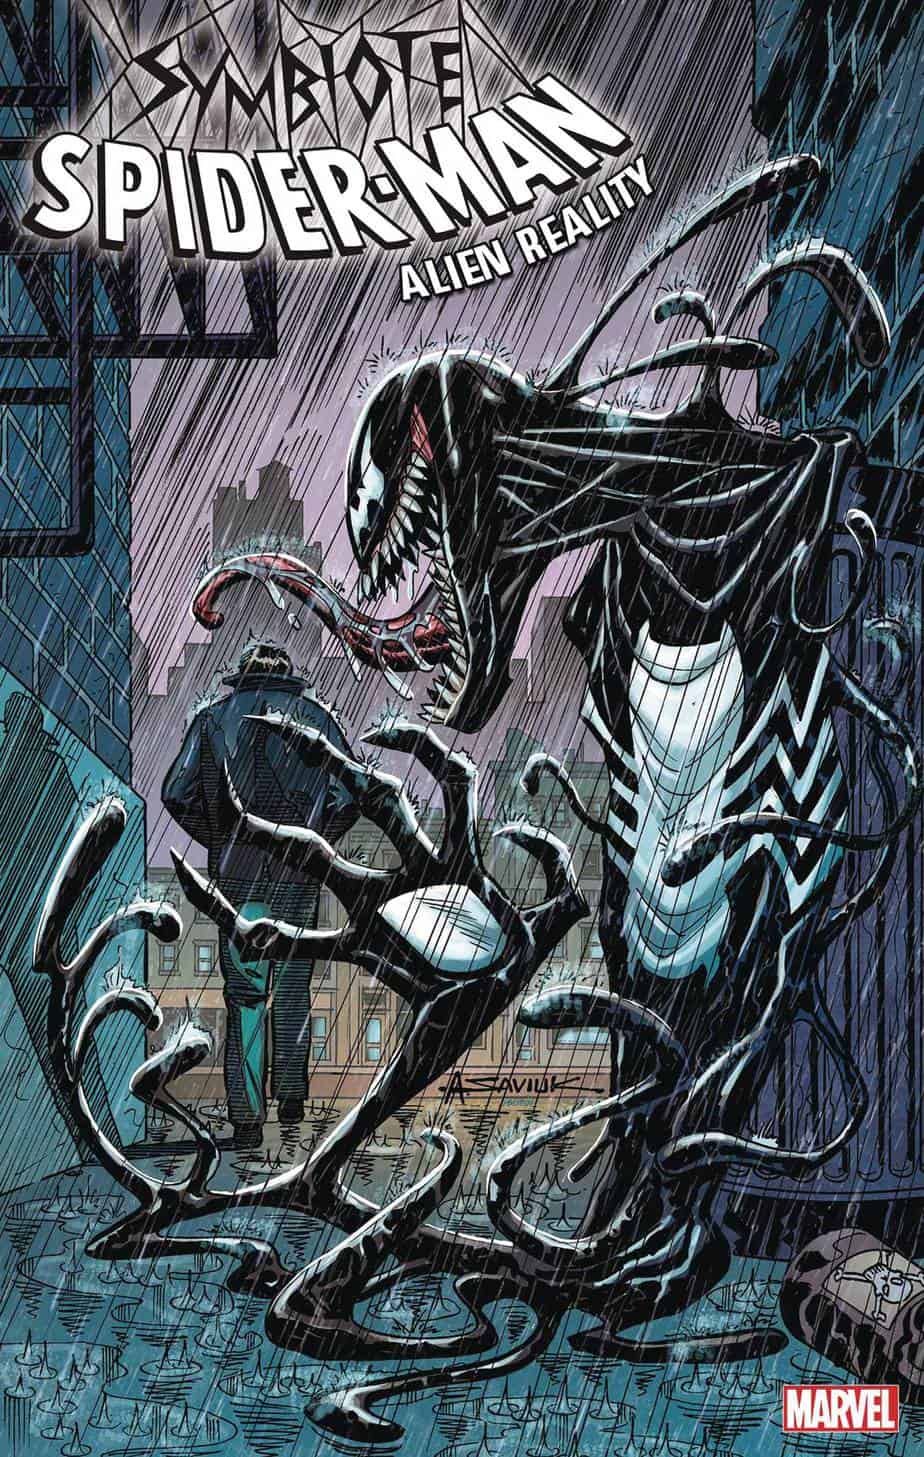 SYMBIOTE SPIDER-MAN: Alien Reality #5 - Cover B